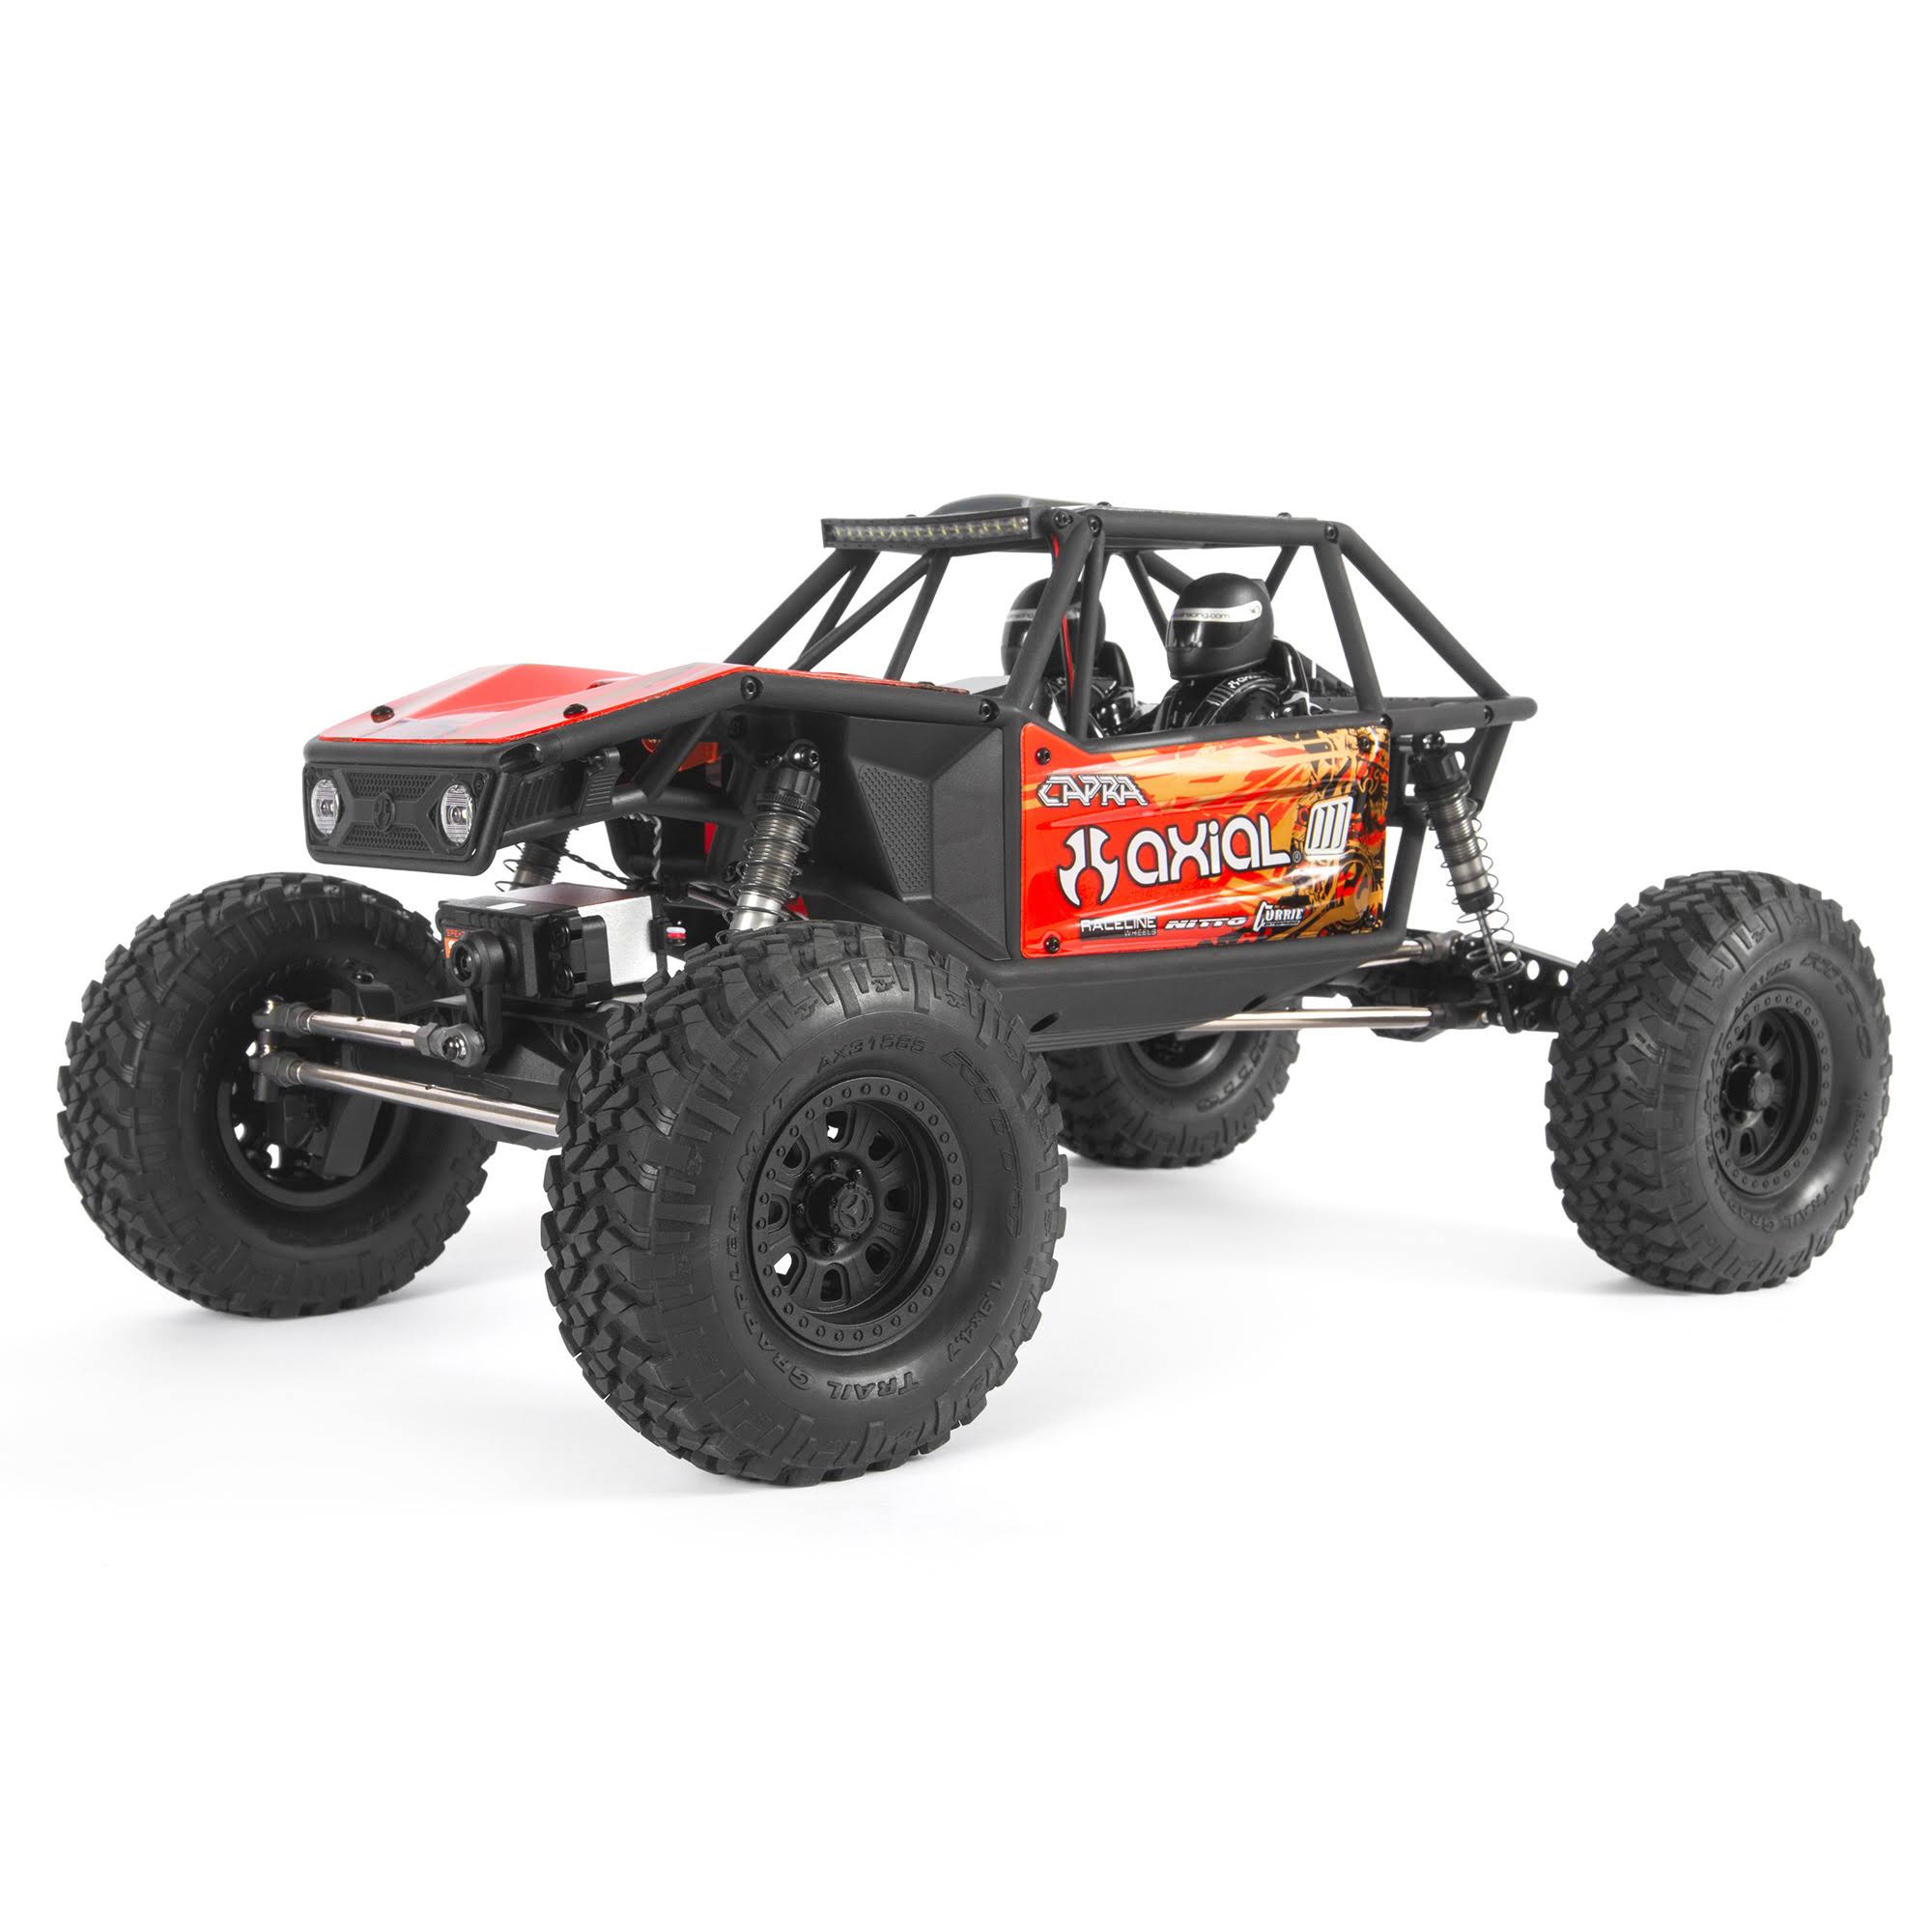 Axial Capra 1.9 Unlimited 4WD Trail Buggy RTR (Red)